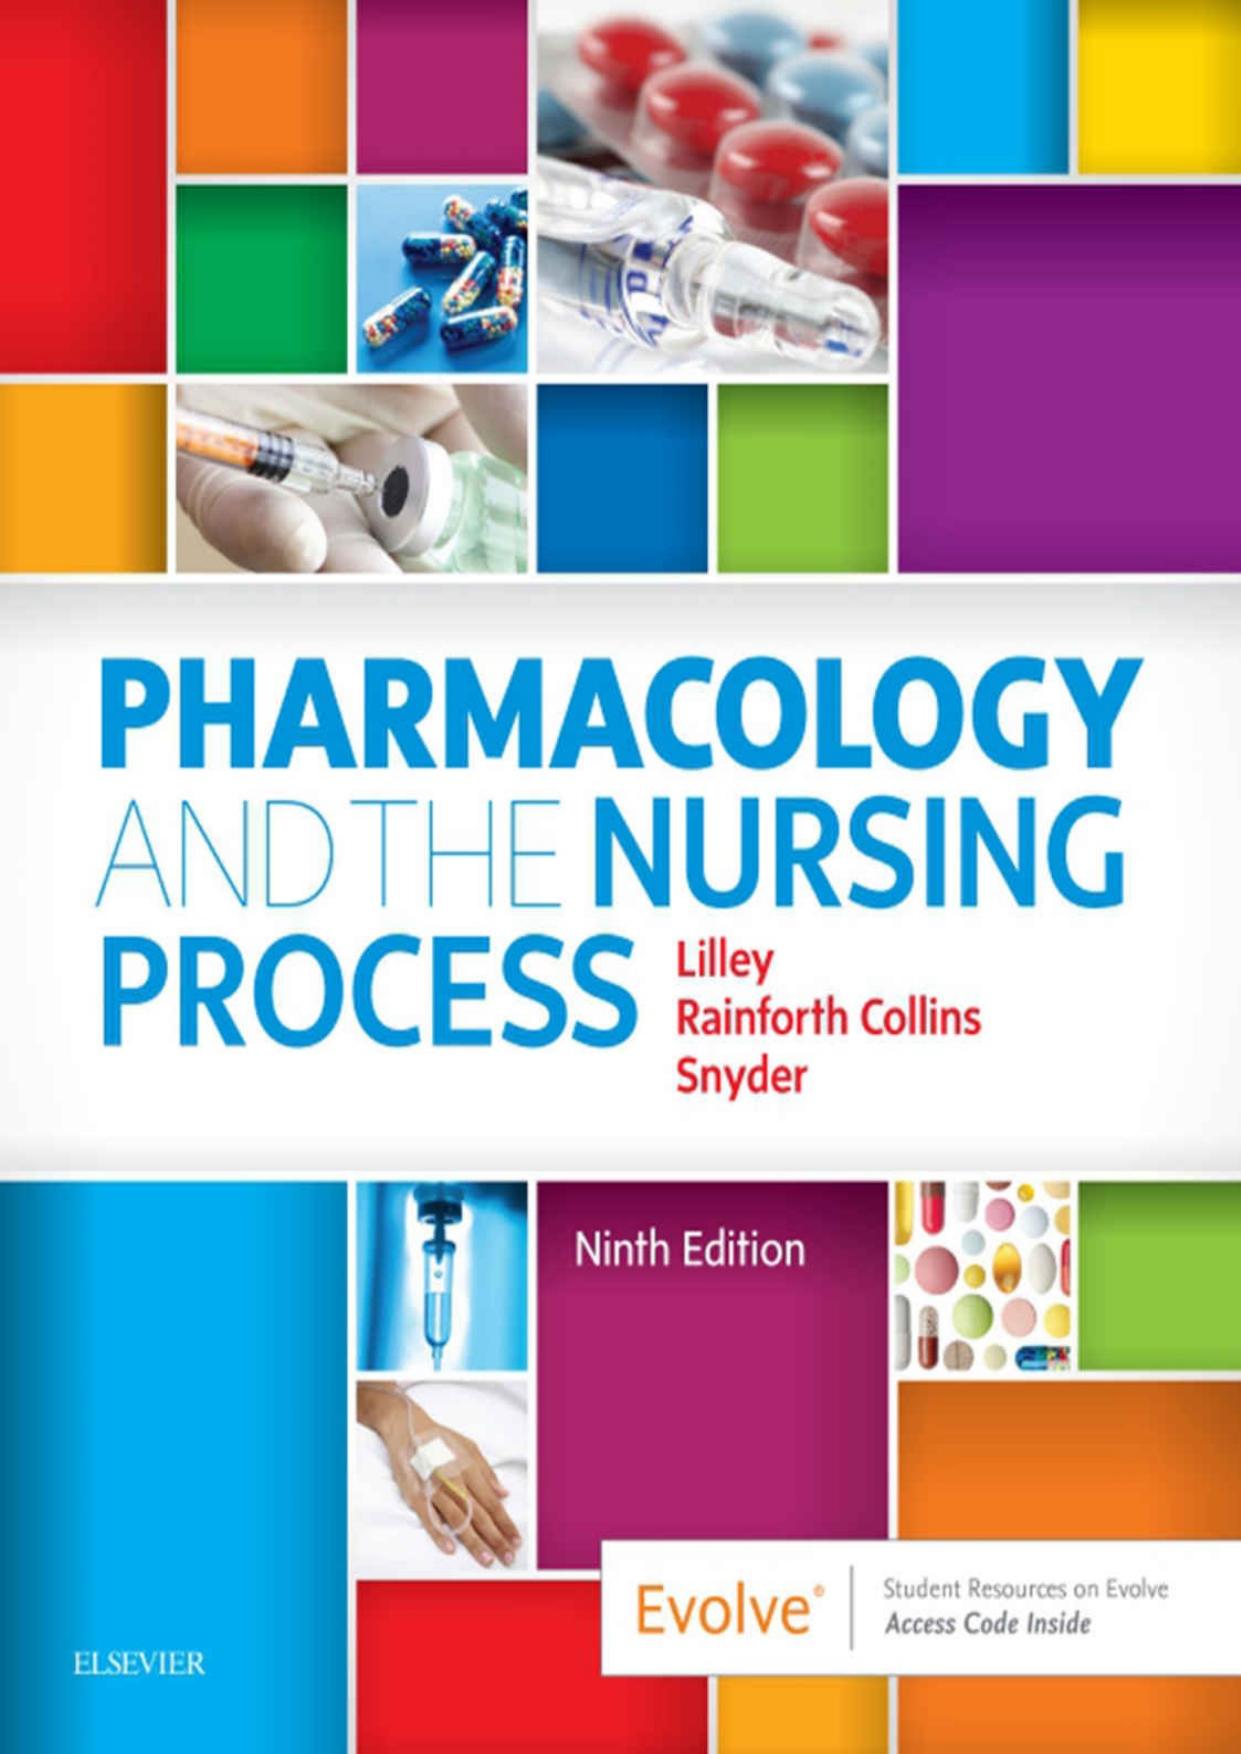 Pharmacology and the Nursing Process E-Book